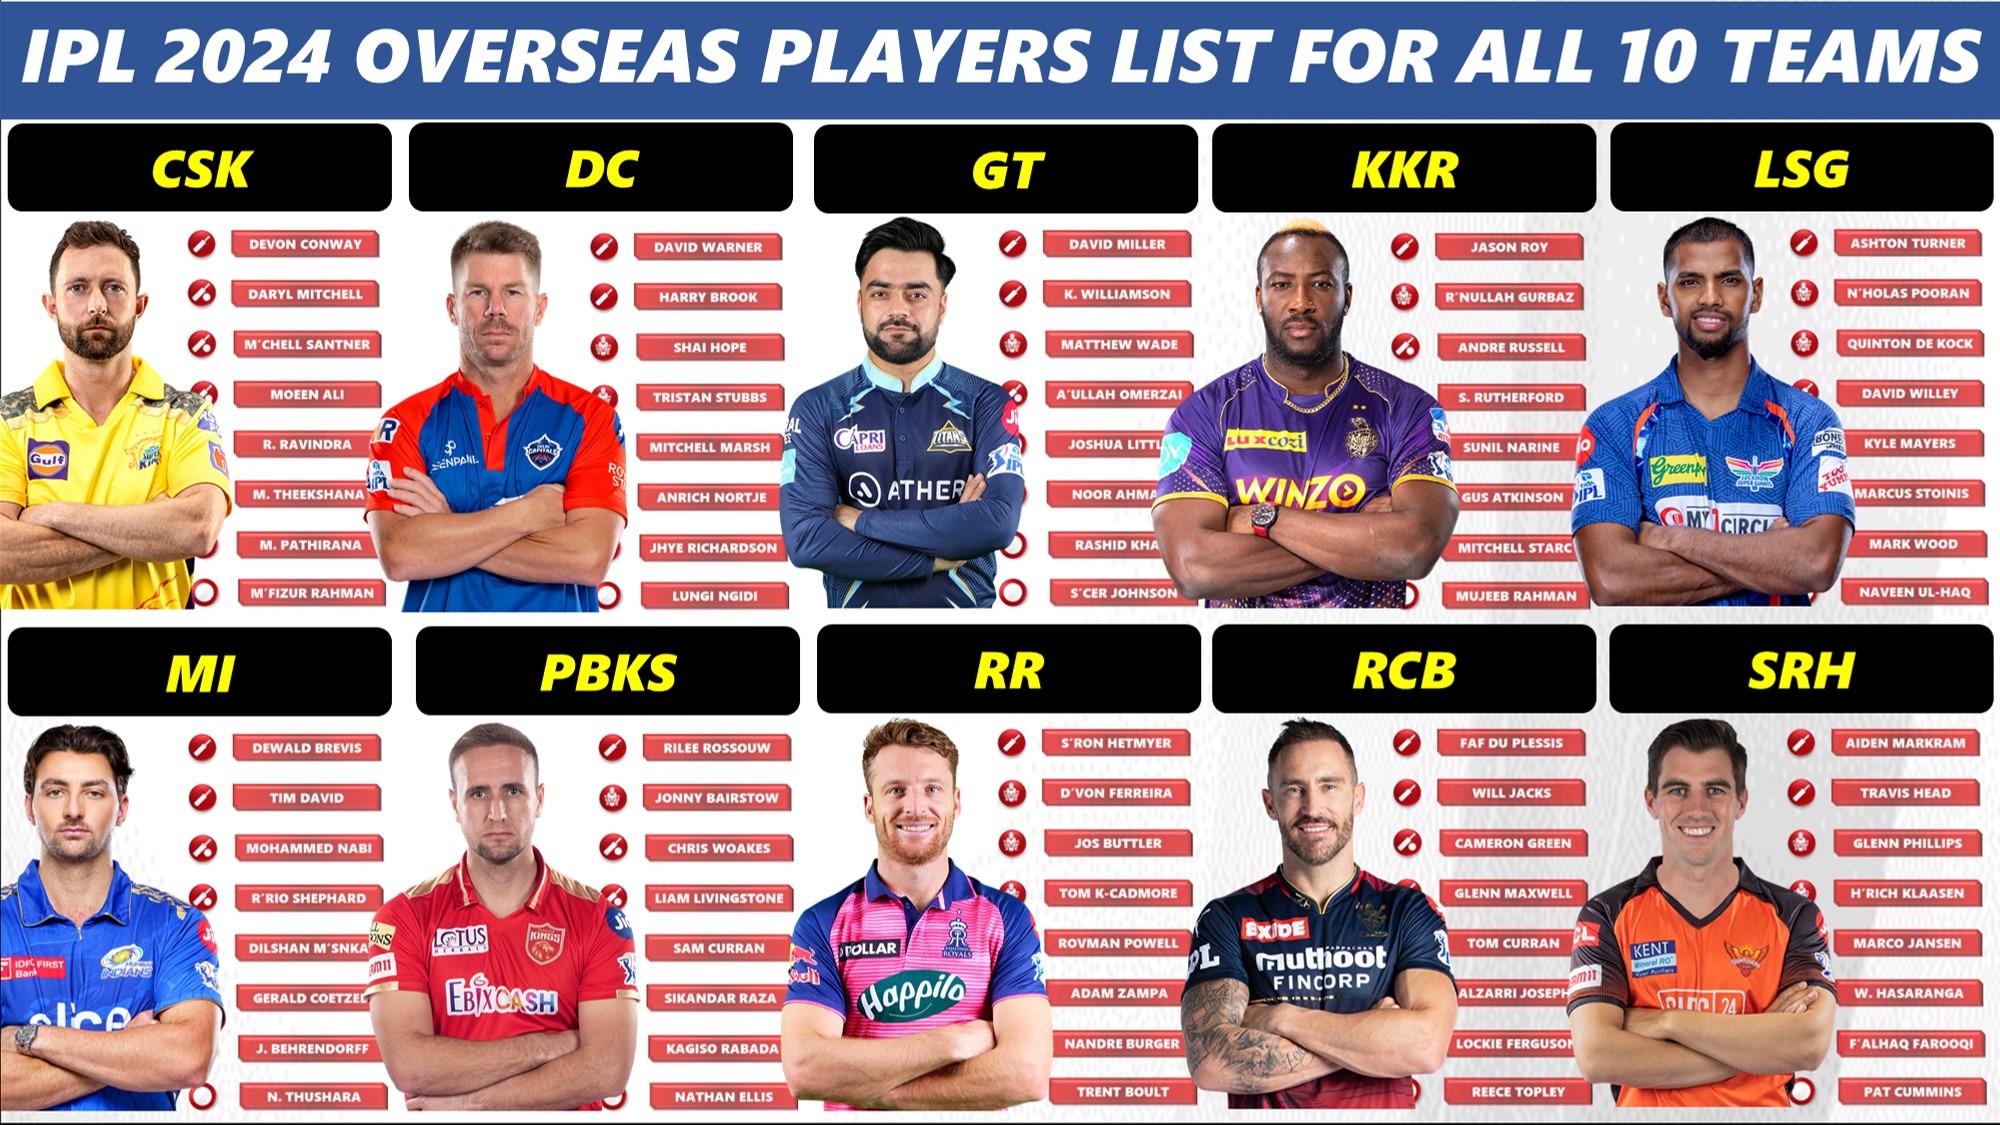 IPL 2024 Overseas Players Ranking for all 10 Teams